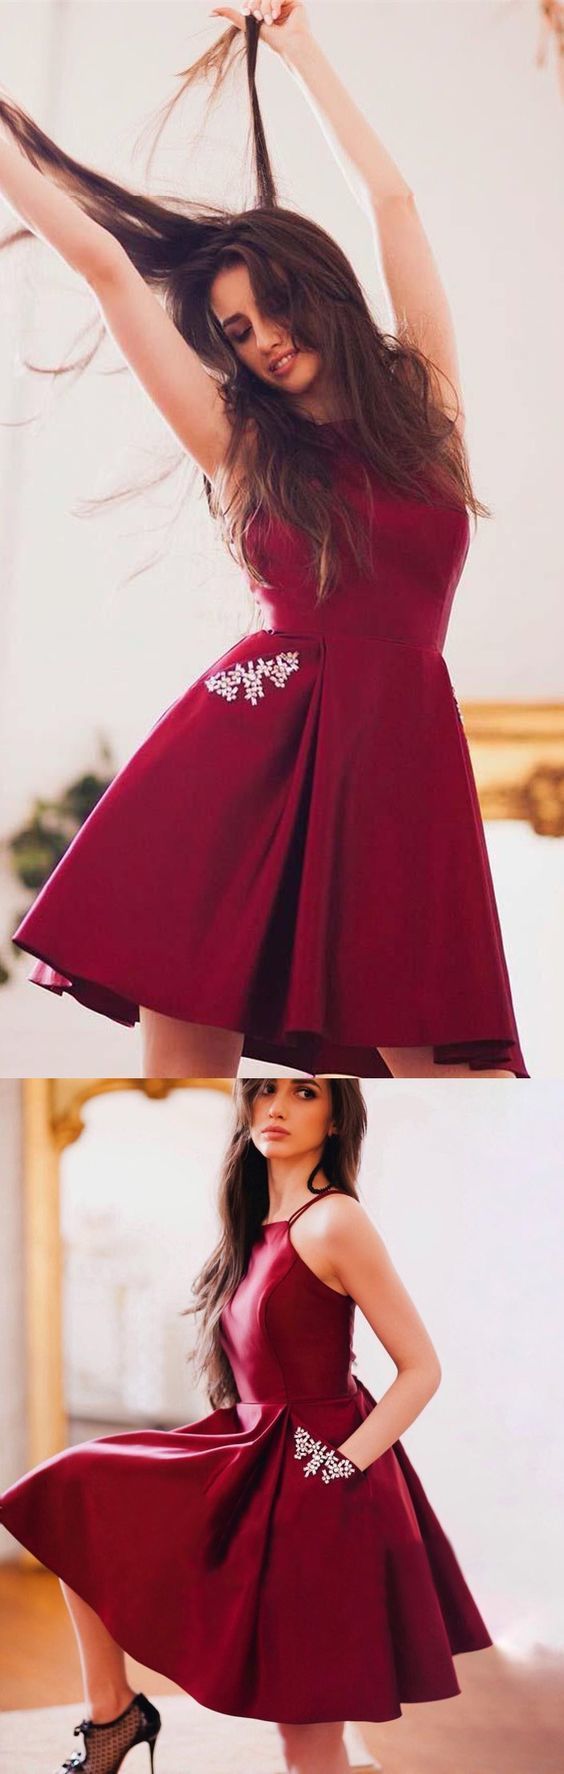 Burgundy Homecoming Dresses with Pockets A-line Short homecoming Dress Cute Party Dress cg785